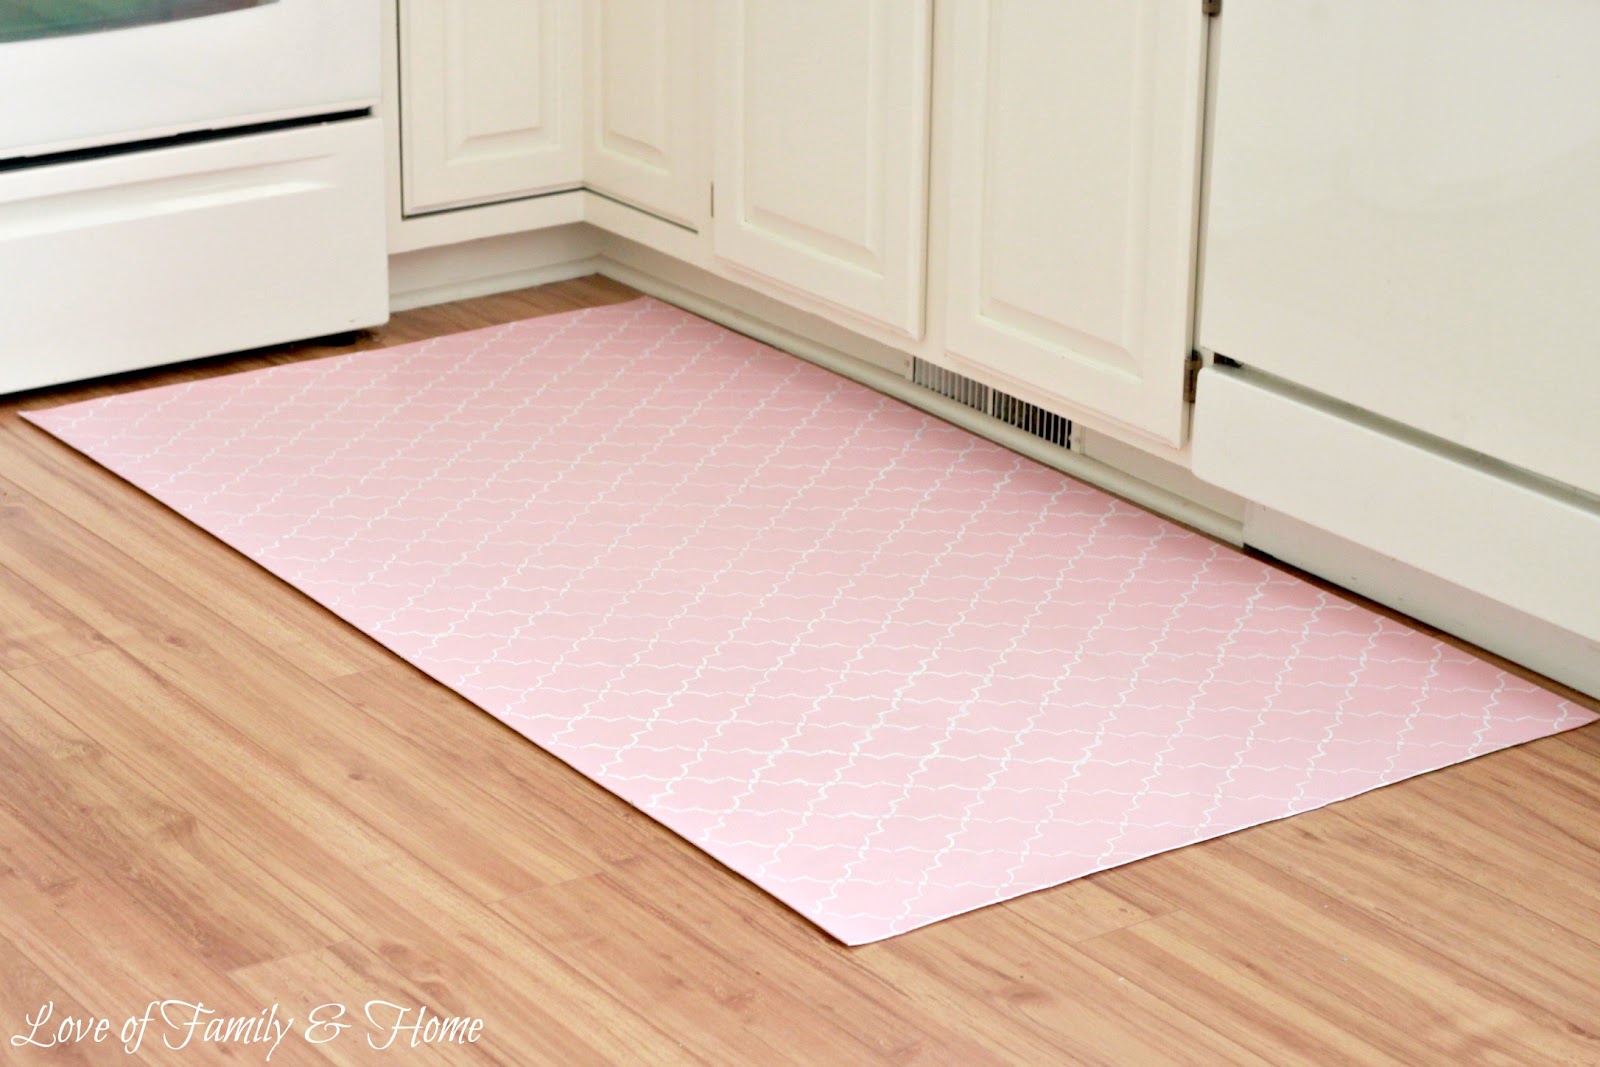 How To Paint A Rug Using Vinyl Flooring Love Of Family Home